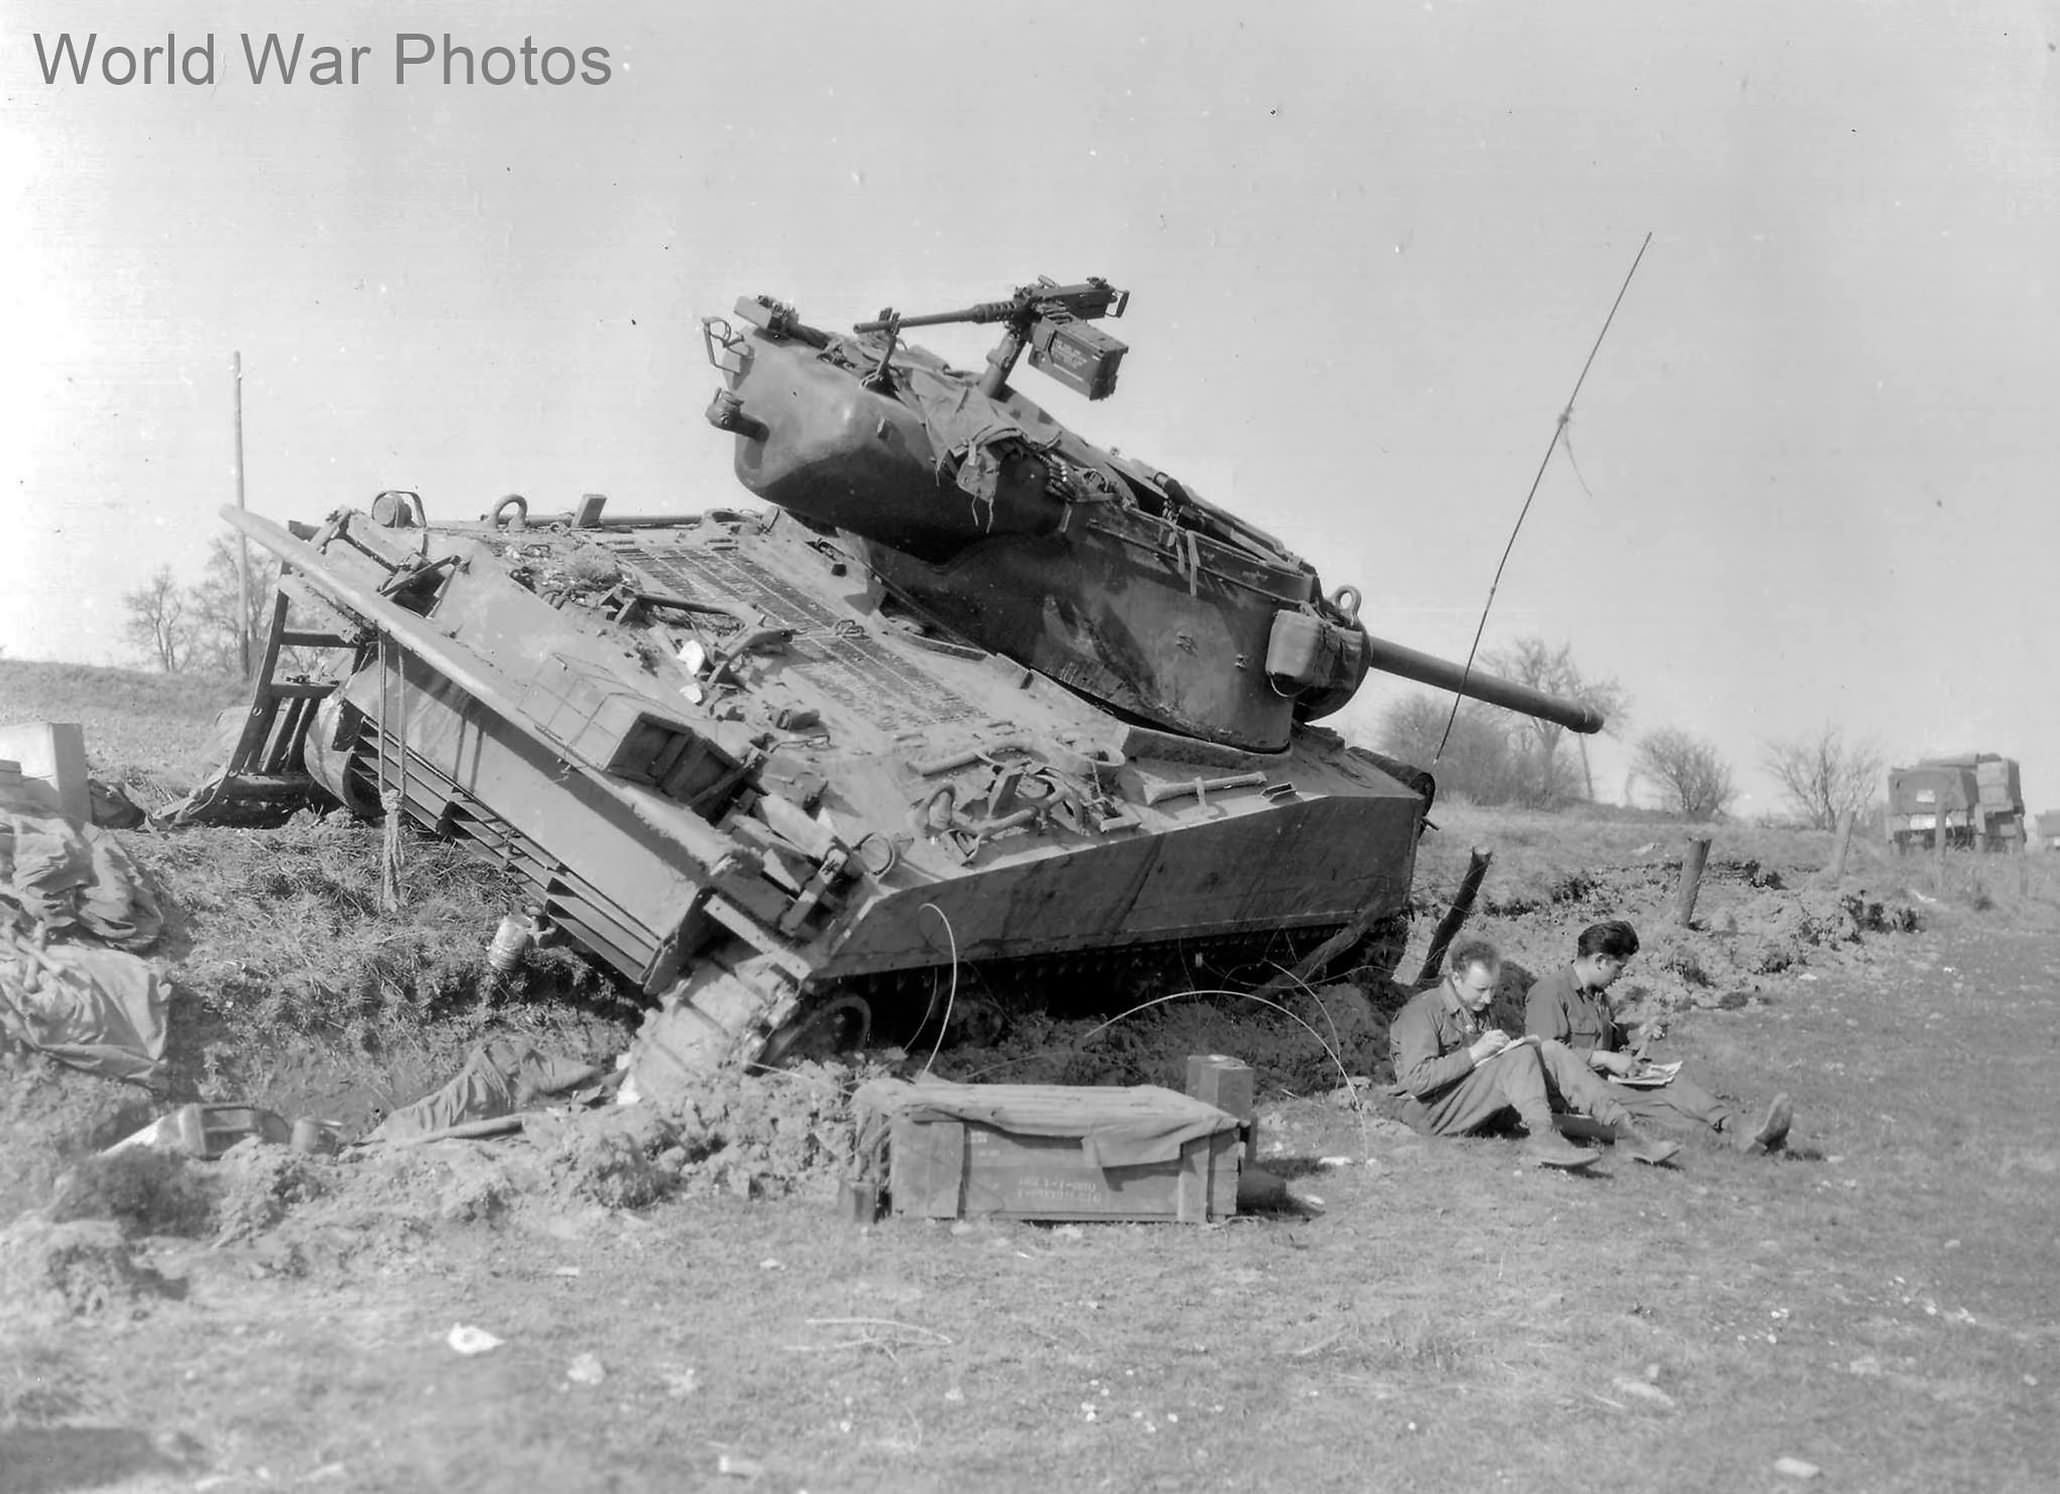 Knocked out M36B1, 1945